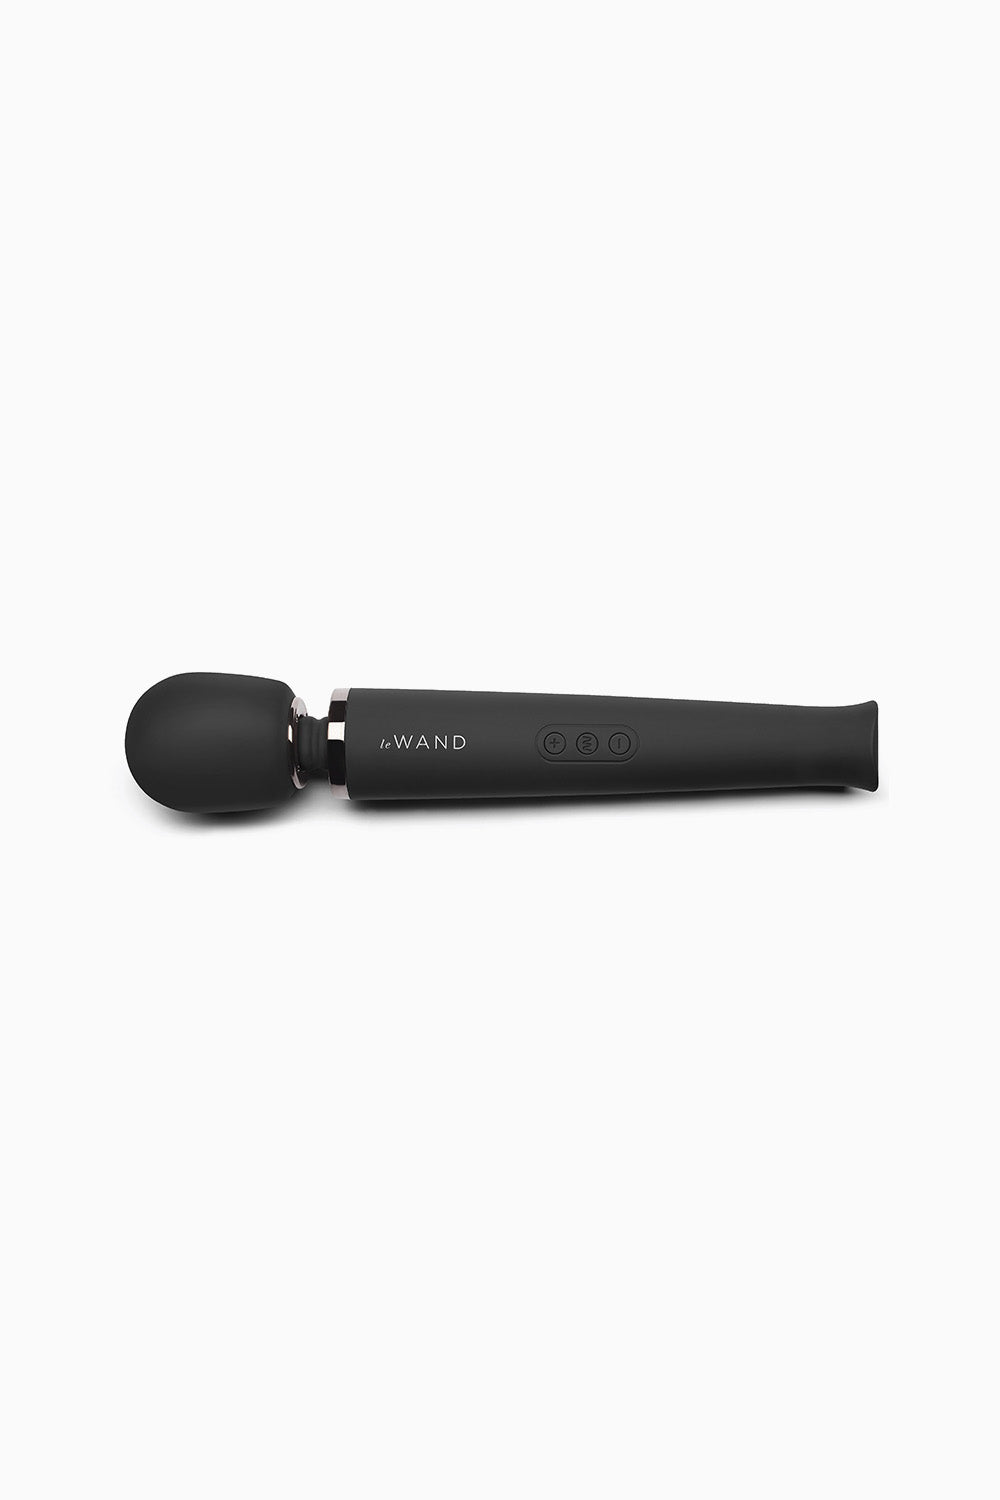 Le Wand Rechargeable Massager Vibrator Wand Black, 13 Inches